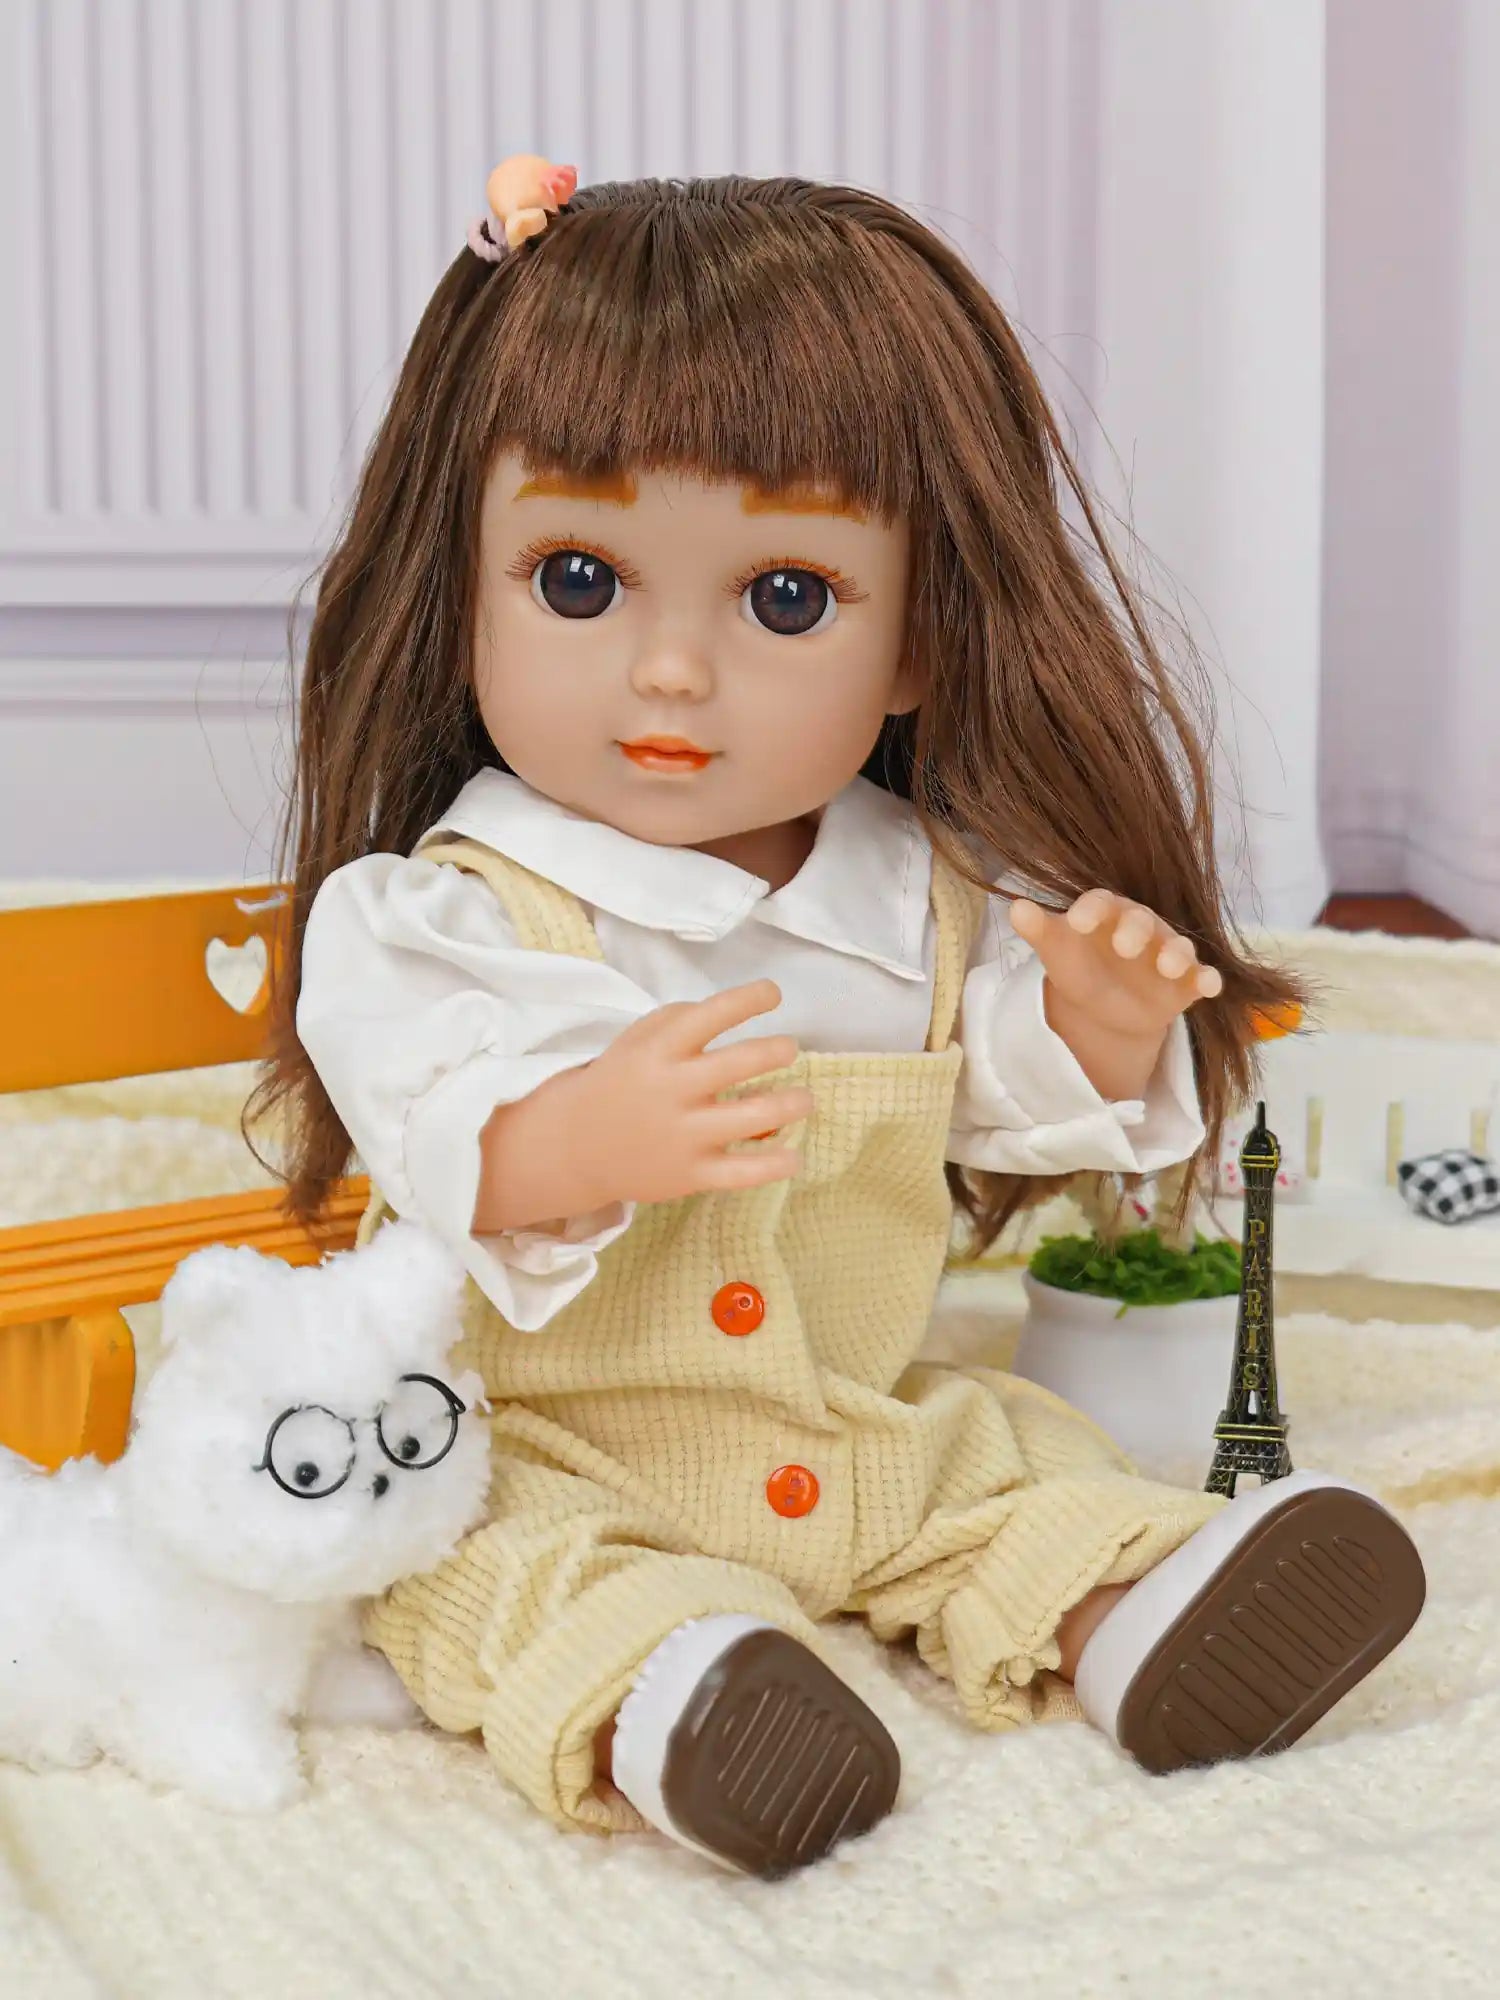 Doll in casual wear with a white dog toy and Parisian souvenir.